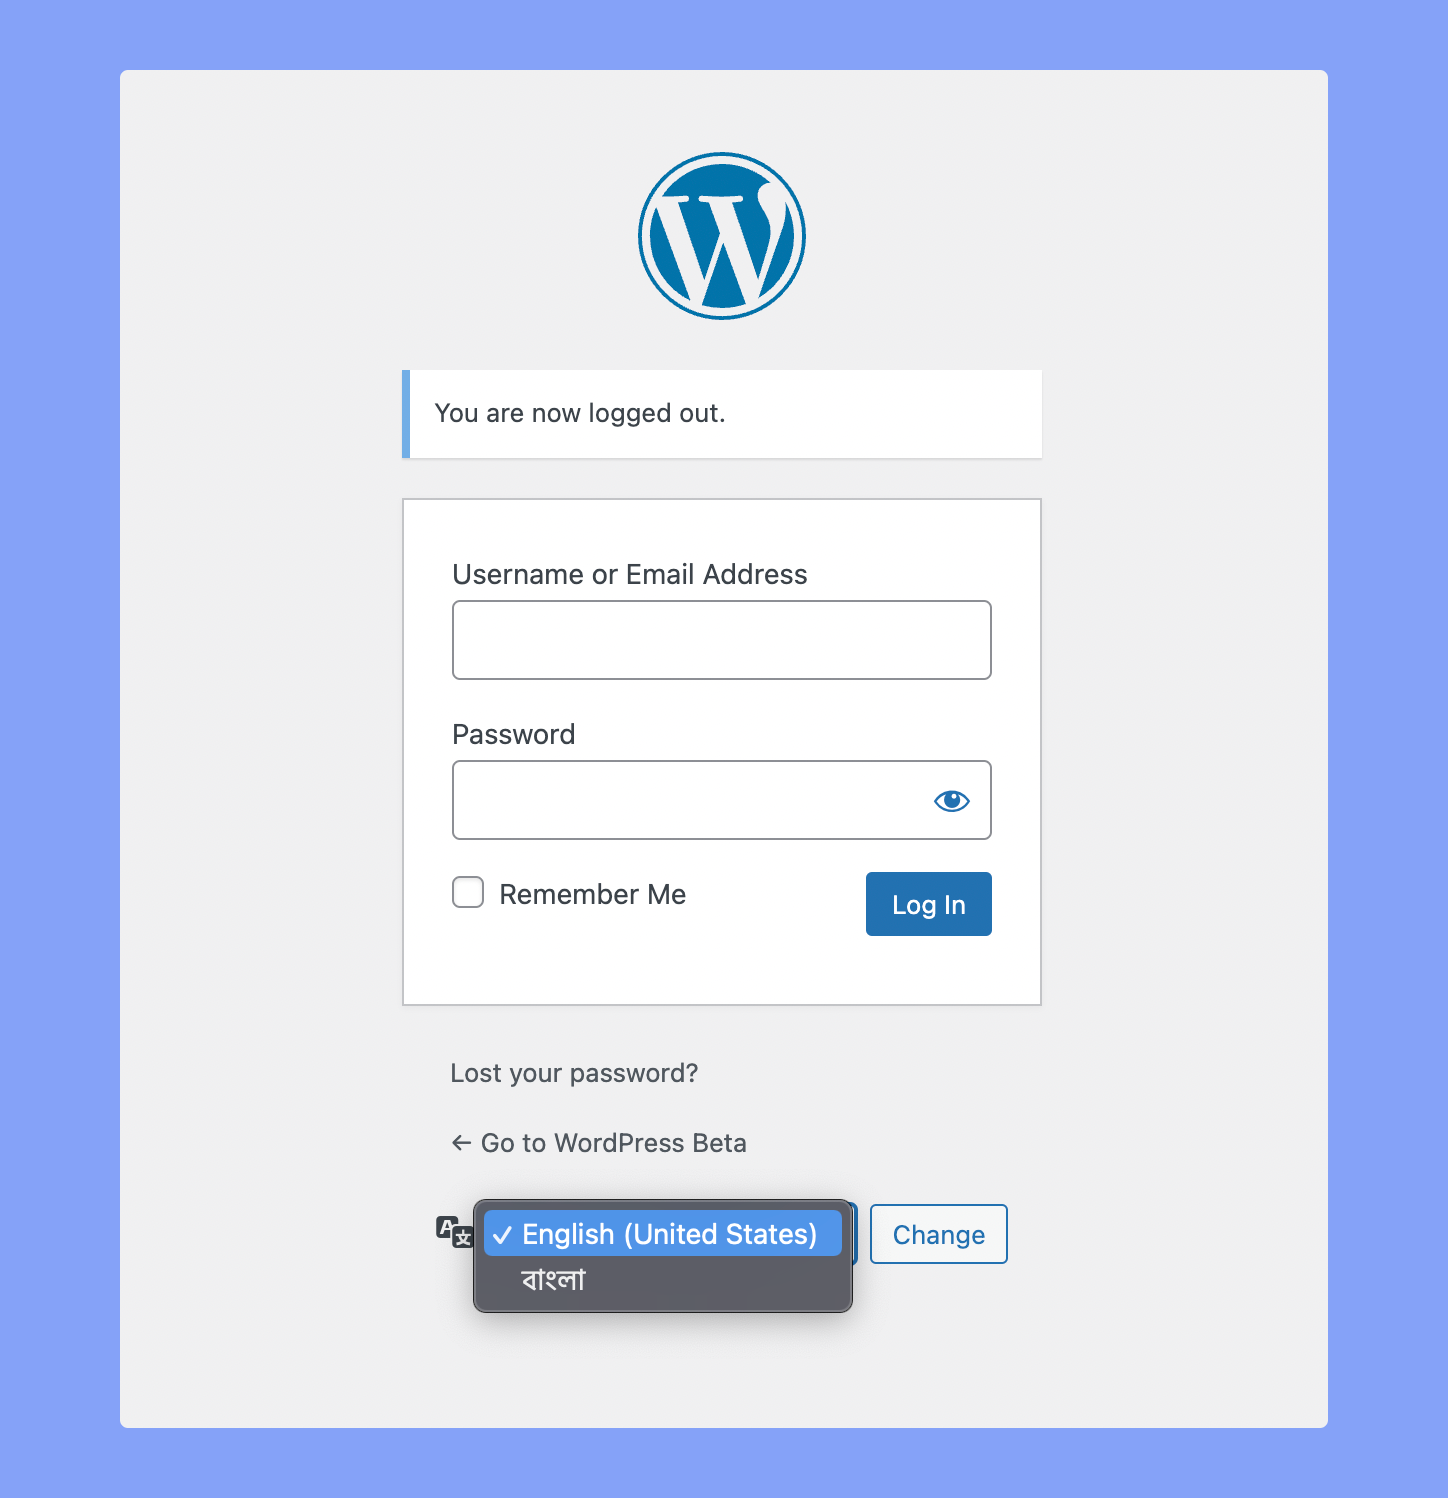 What's New in The Upcoming WordPress 5.9